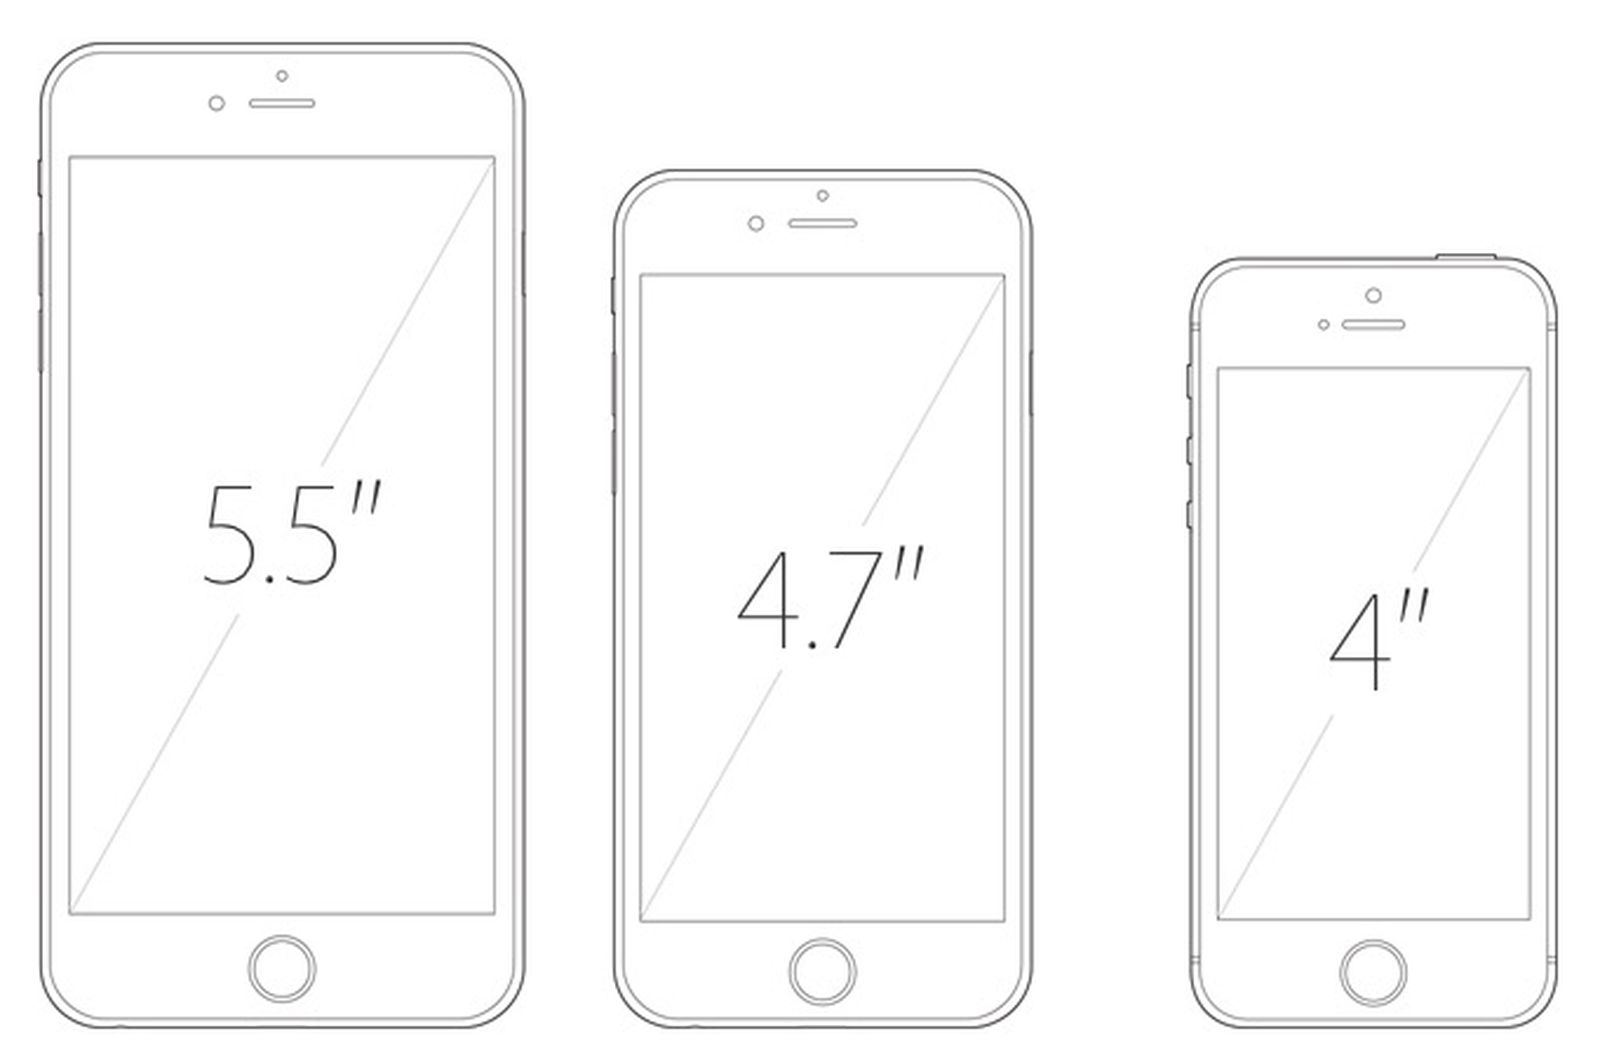 Iphone 6s Iphone 6s Plus And 4 Inch Iphone 6c Rumored For 15 Release Macrumors